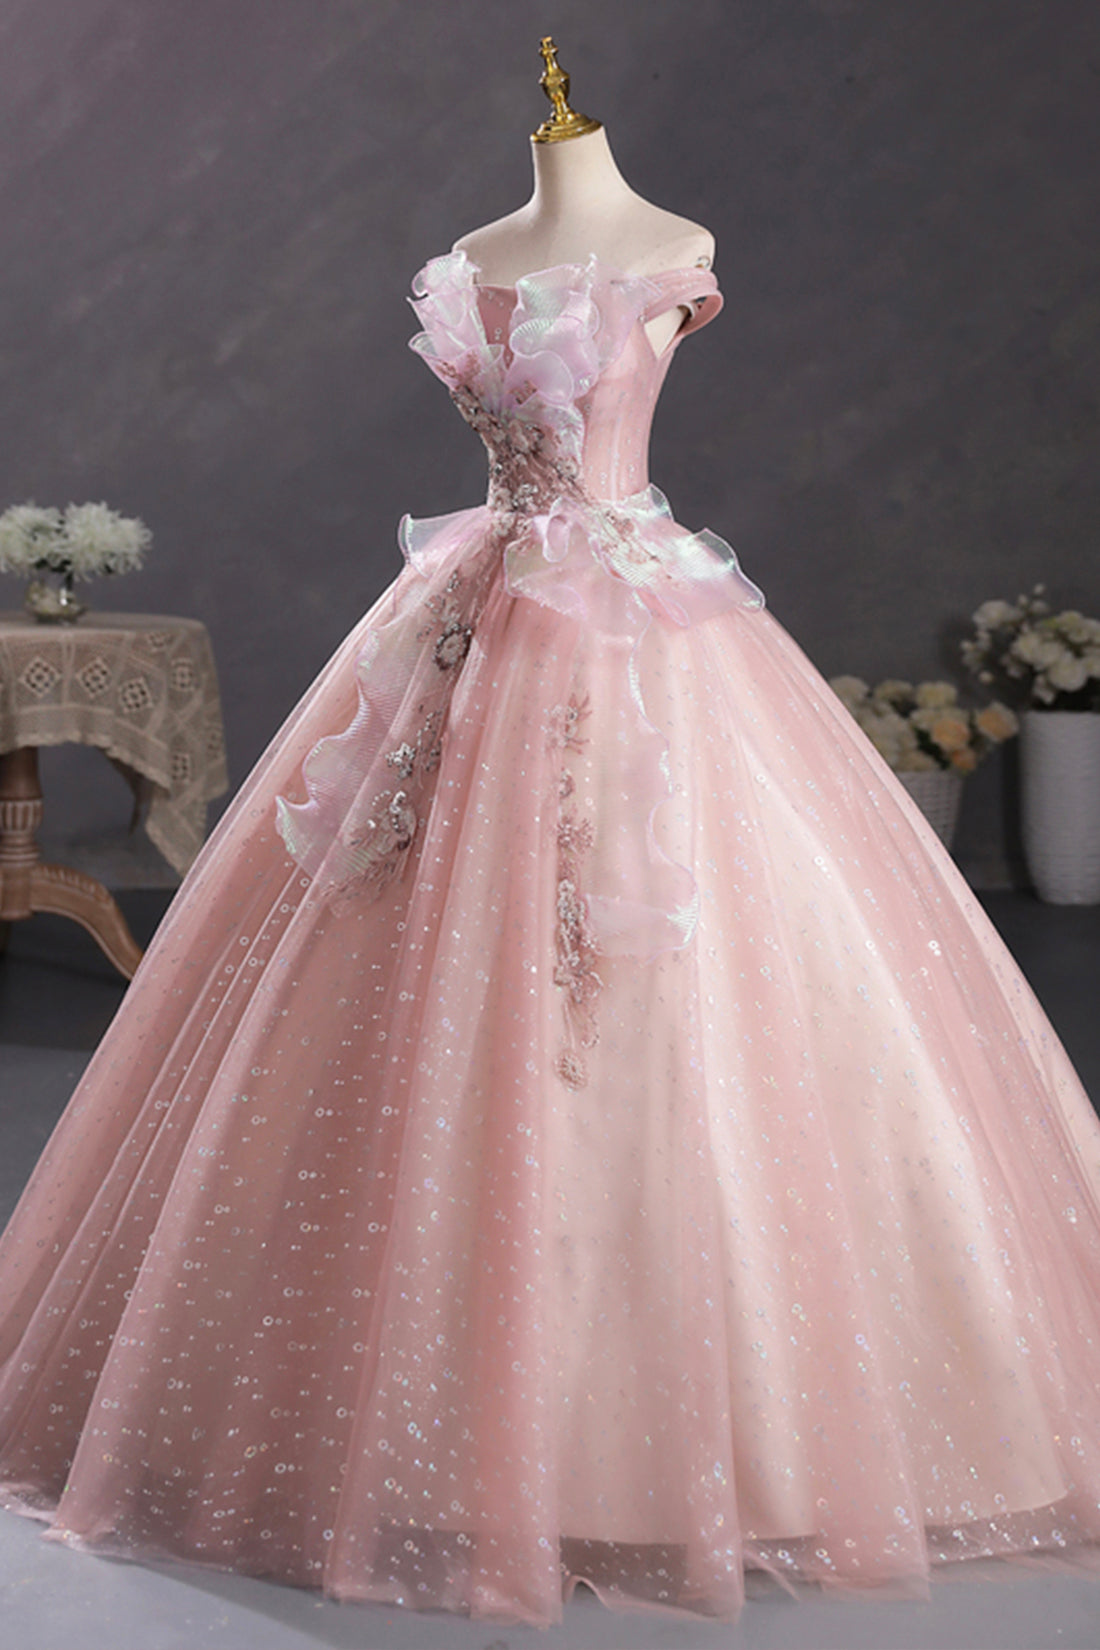 Formal Dresses Floral, Pink Tulle Long A-Line Prom Dress with Lace, Off Shoulder Sweet 16 Dress